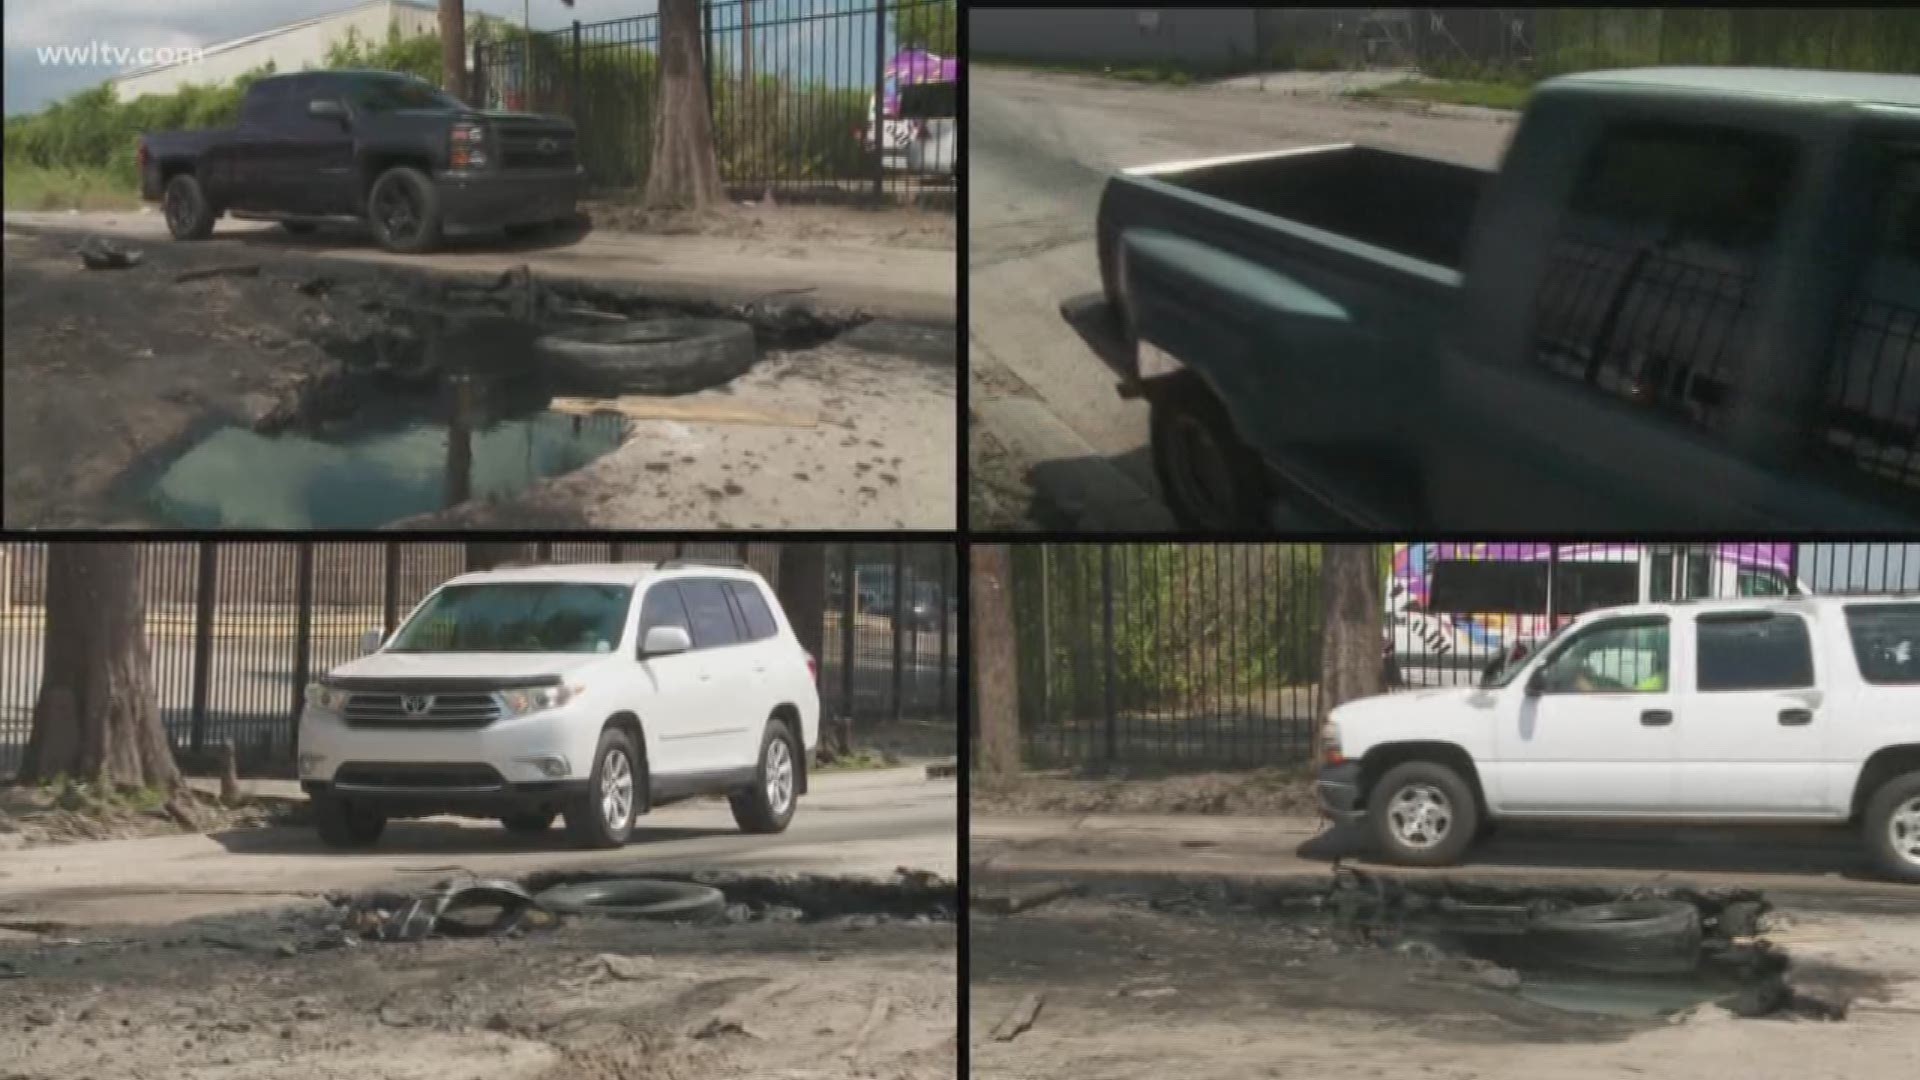 A huge sinkhole in a New Orleans neighborhood has been damaging dozens of cars.